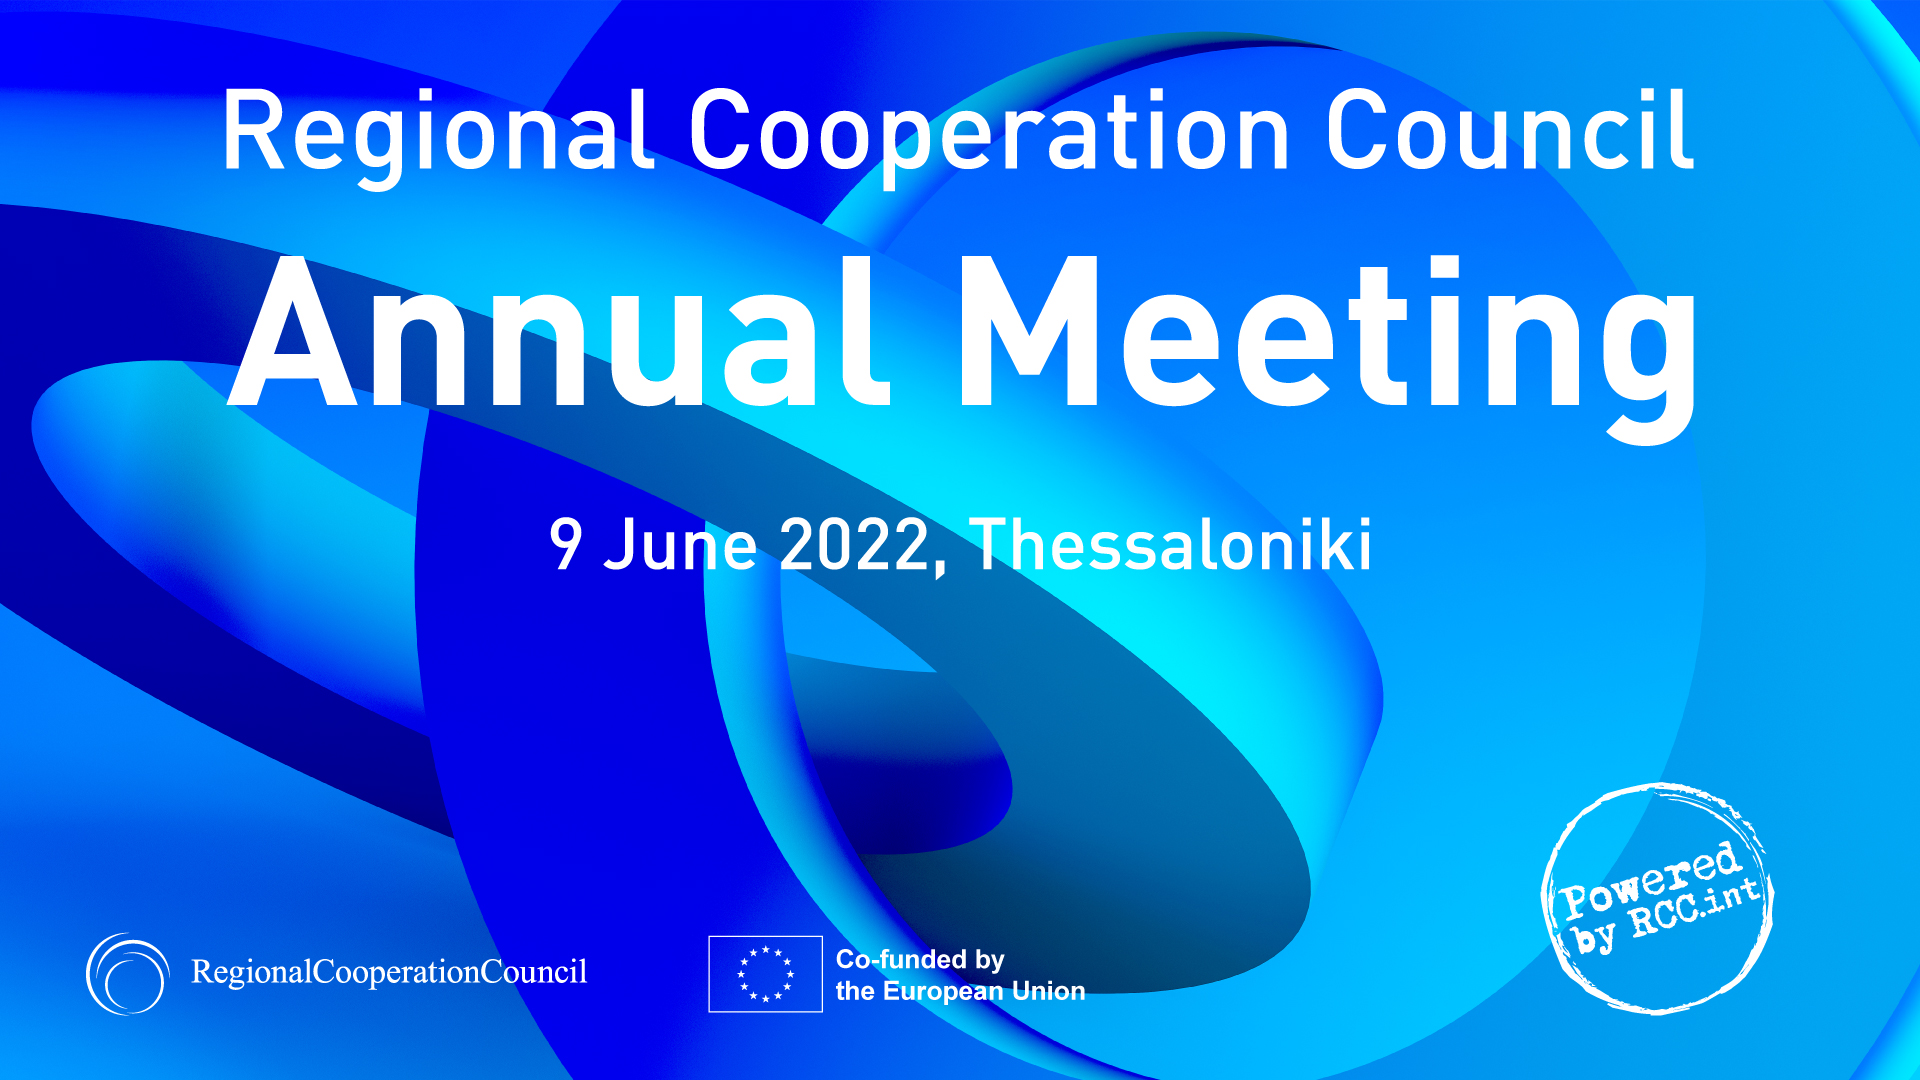 Annual meeting of the Regional Cooperation Council to take place on 9 June 2022 in Thessaloniki (Design: RCC/Sejla Dizdarevic)